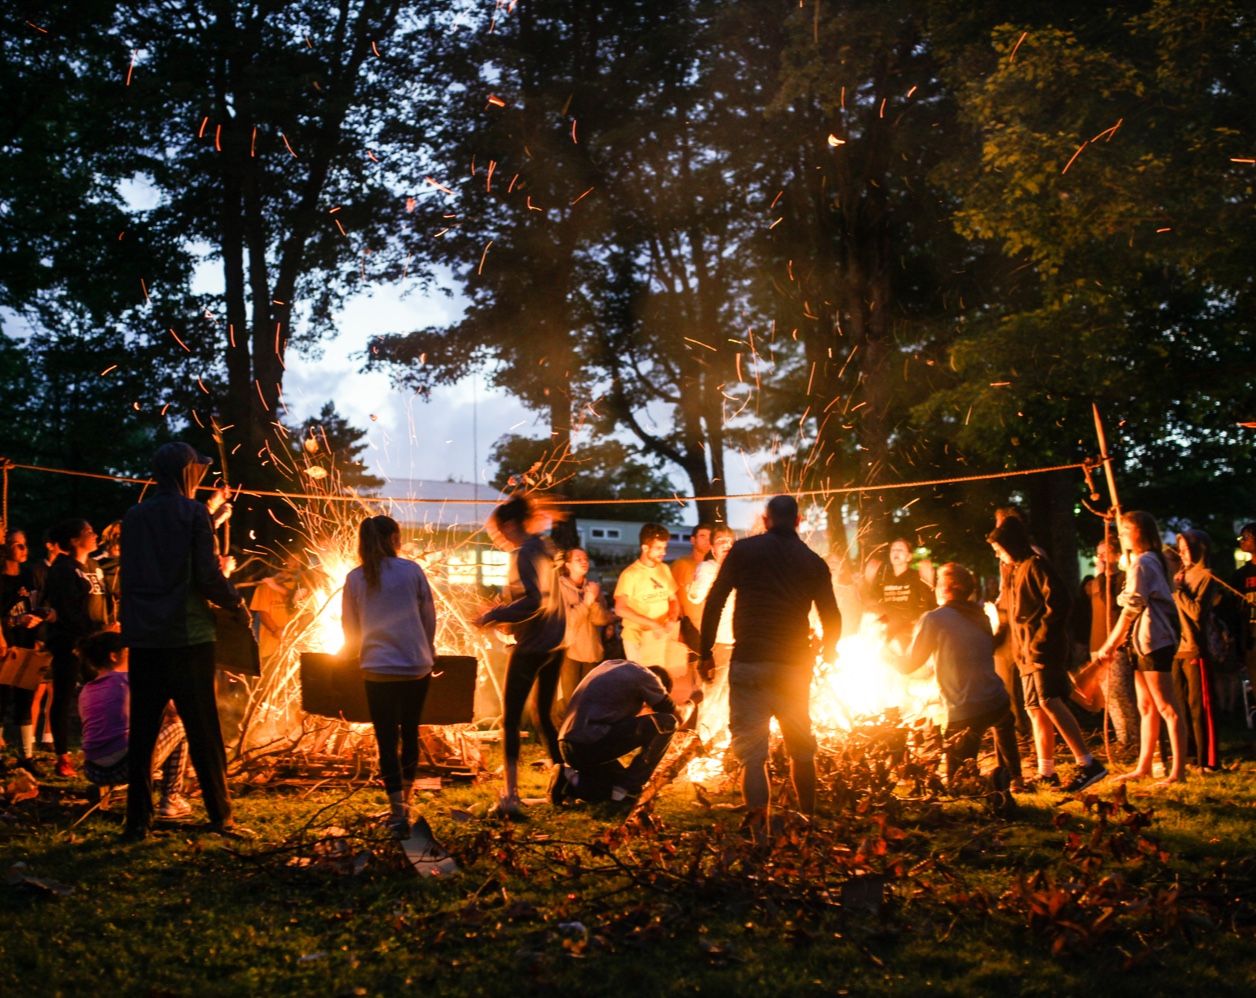 Group of campers around a camp fire at dusk